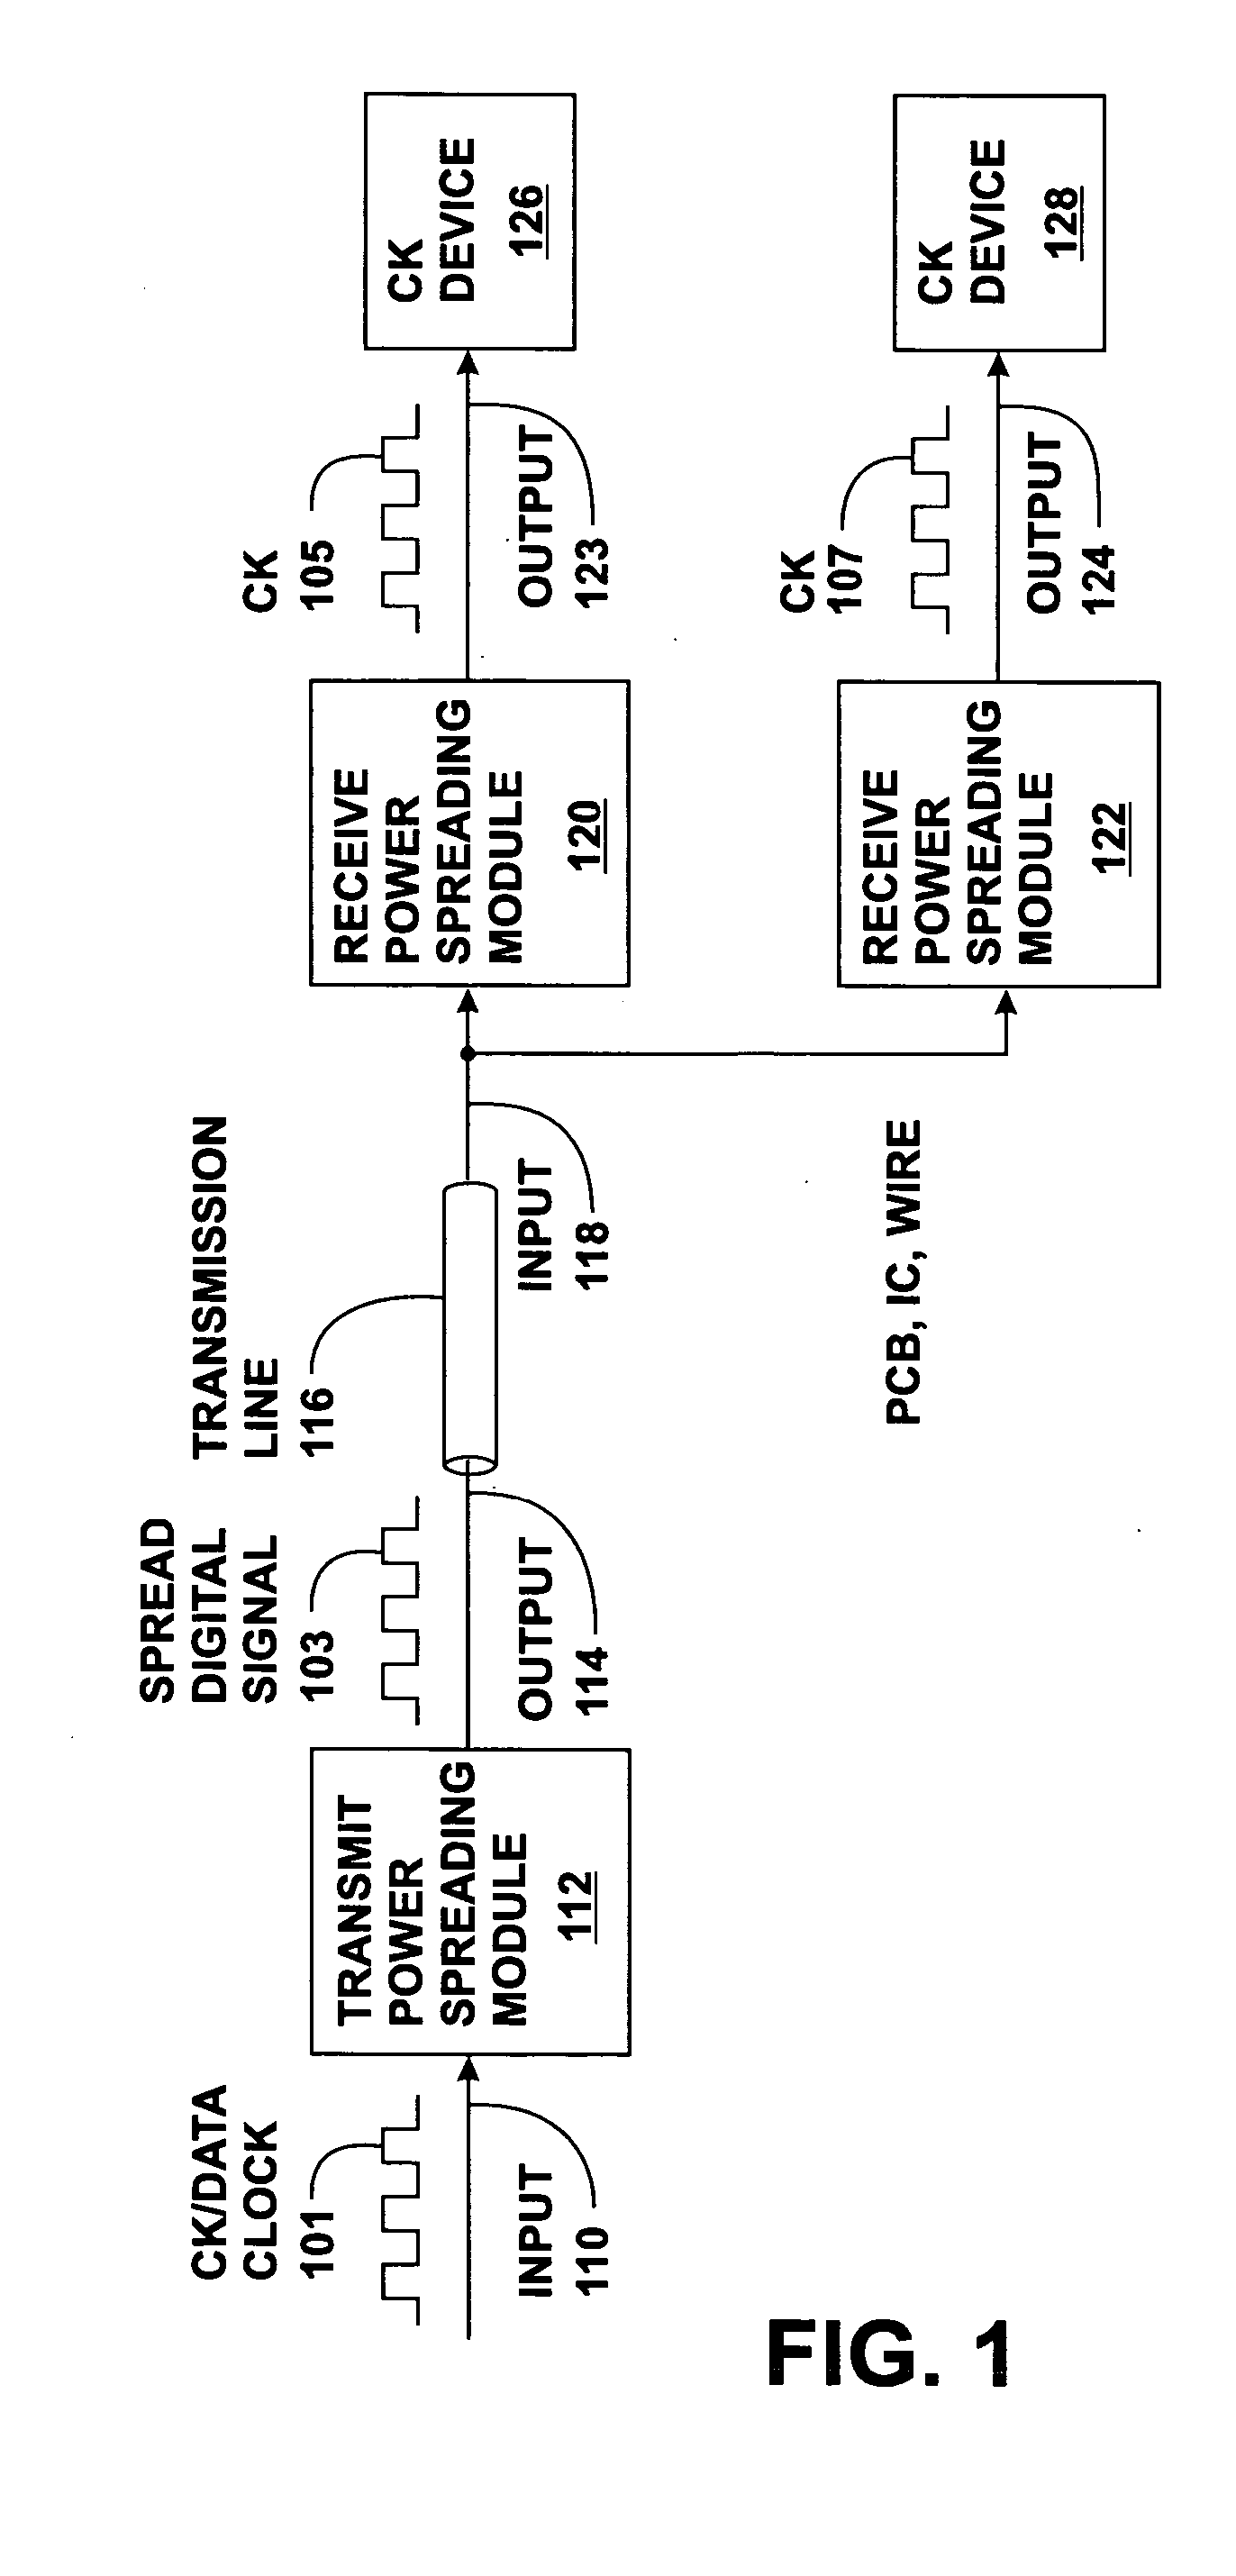 Noise source synchronization for power spread signals